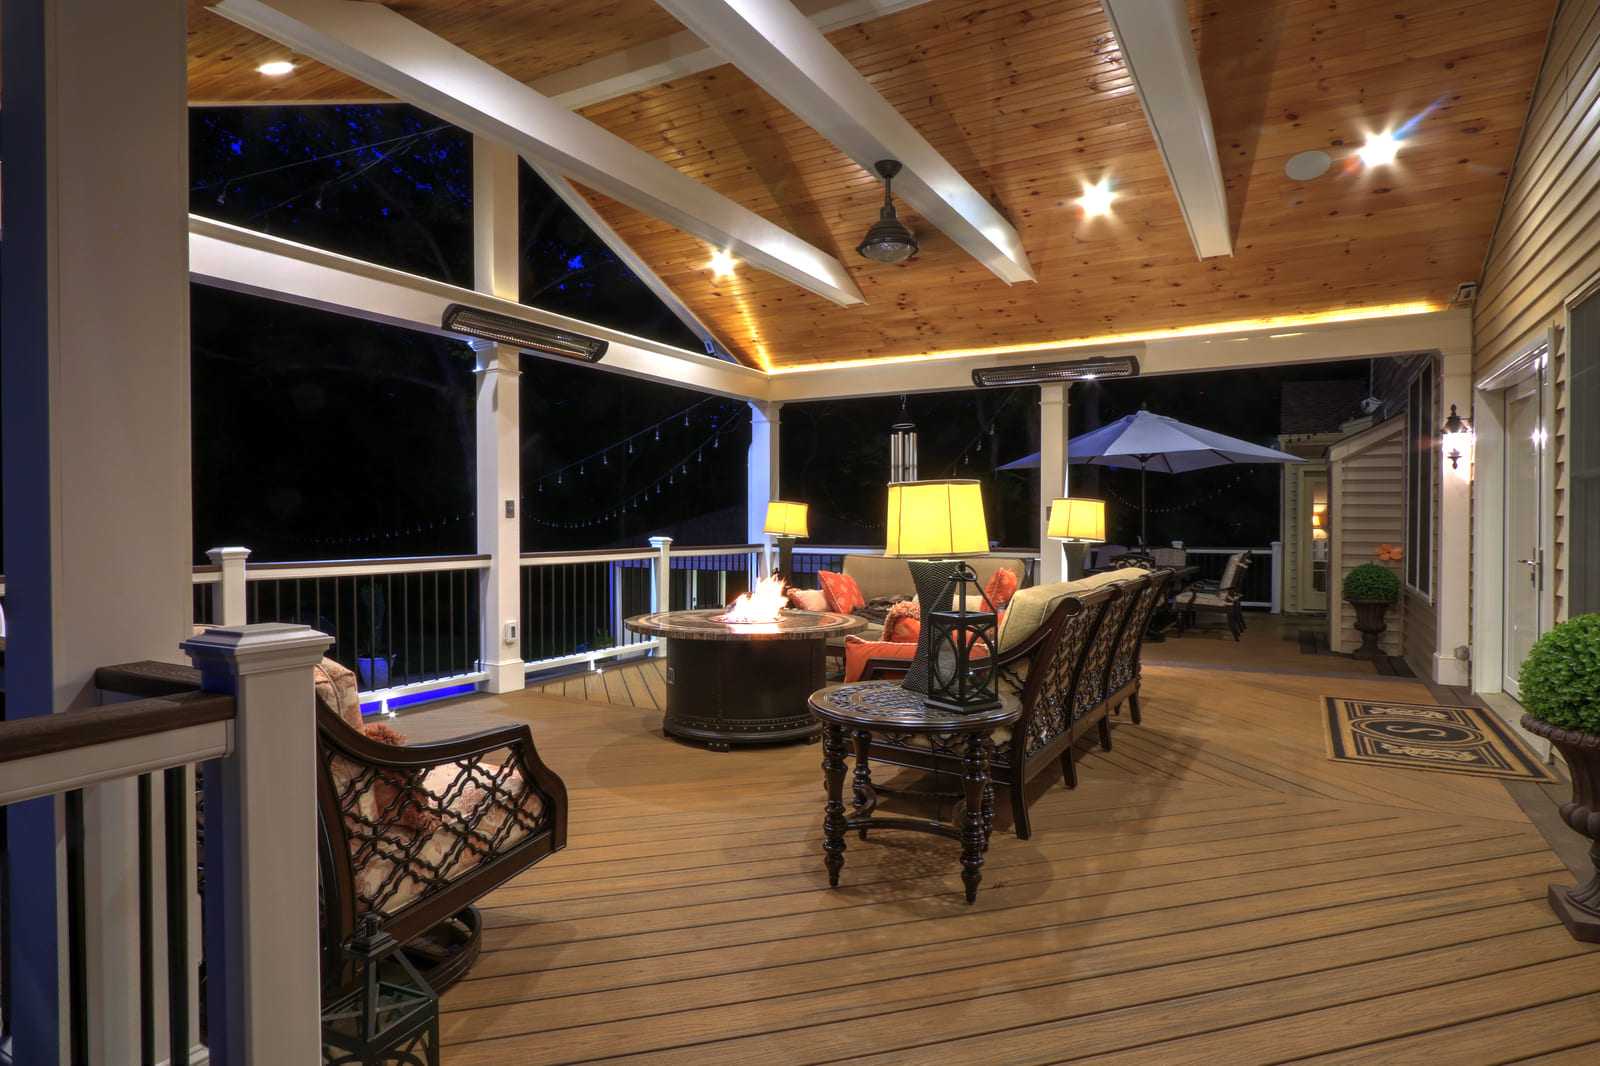 Covered porch interior with recessed lighting in vaulted ceiling at night